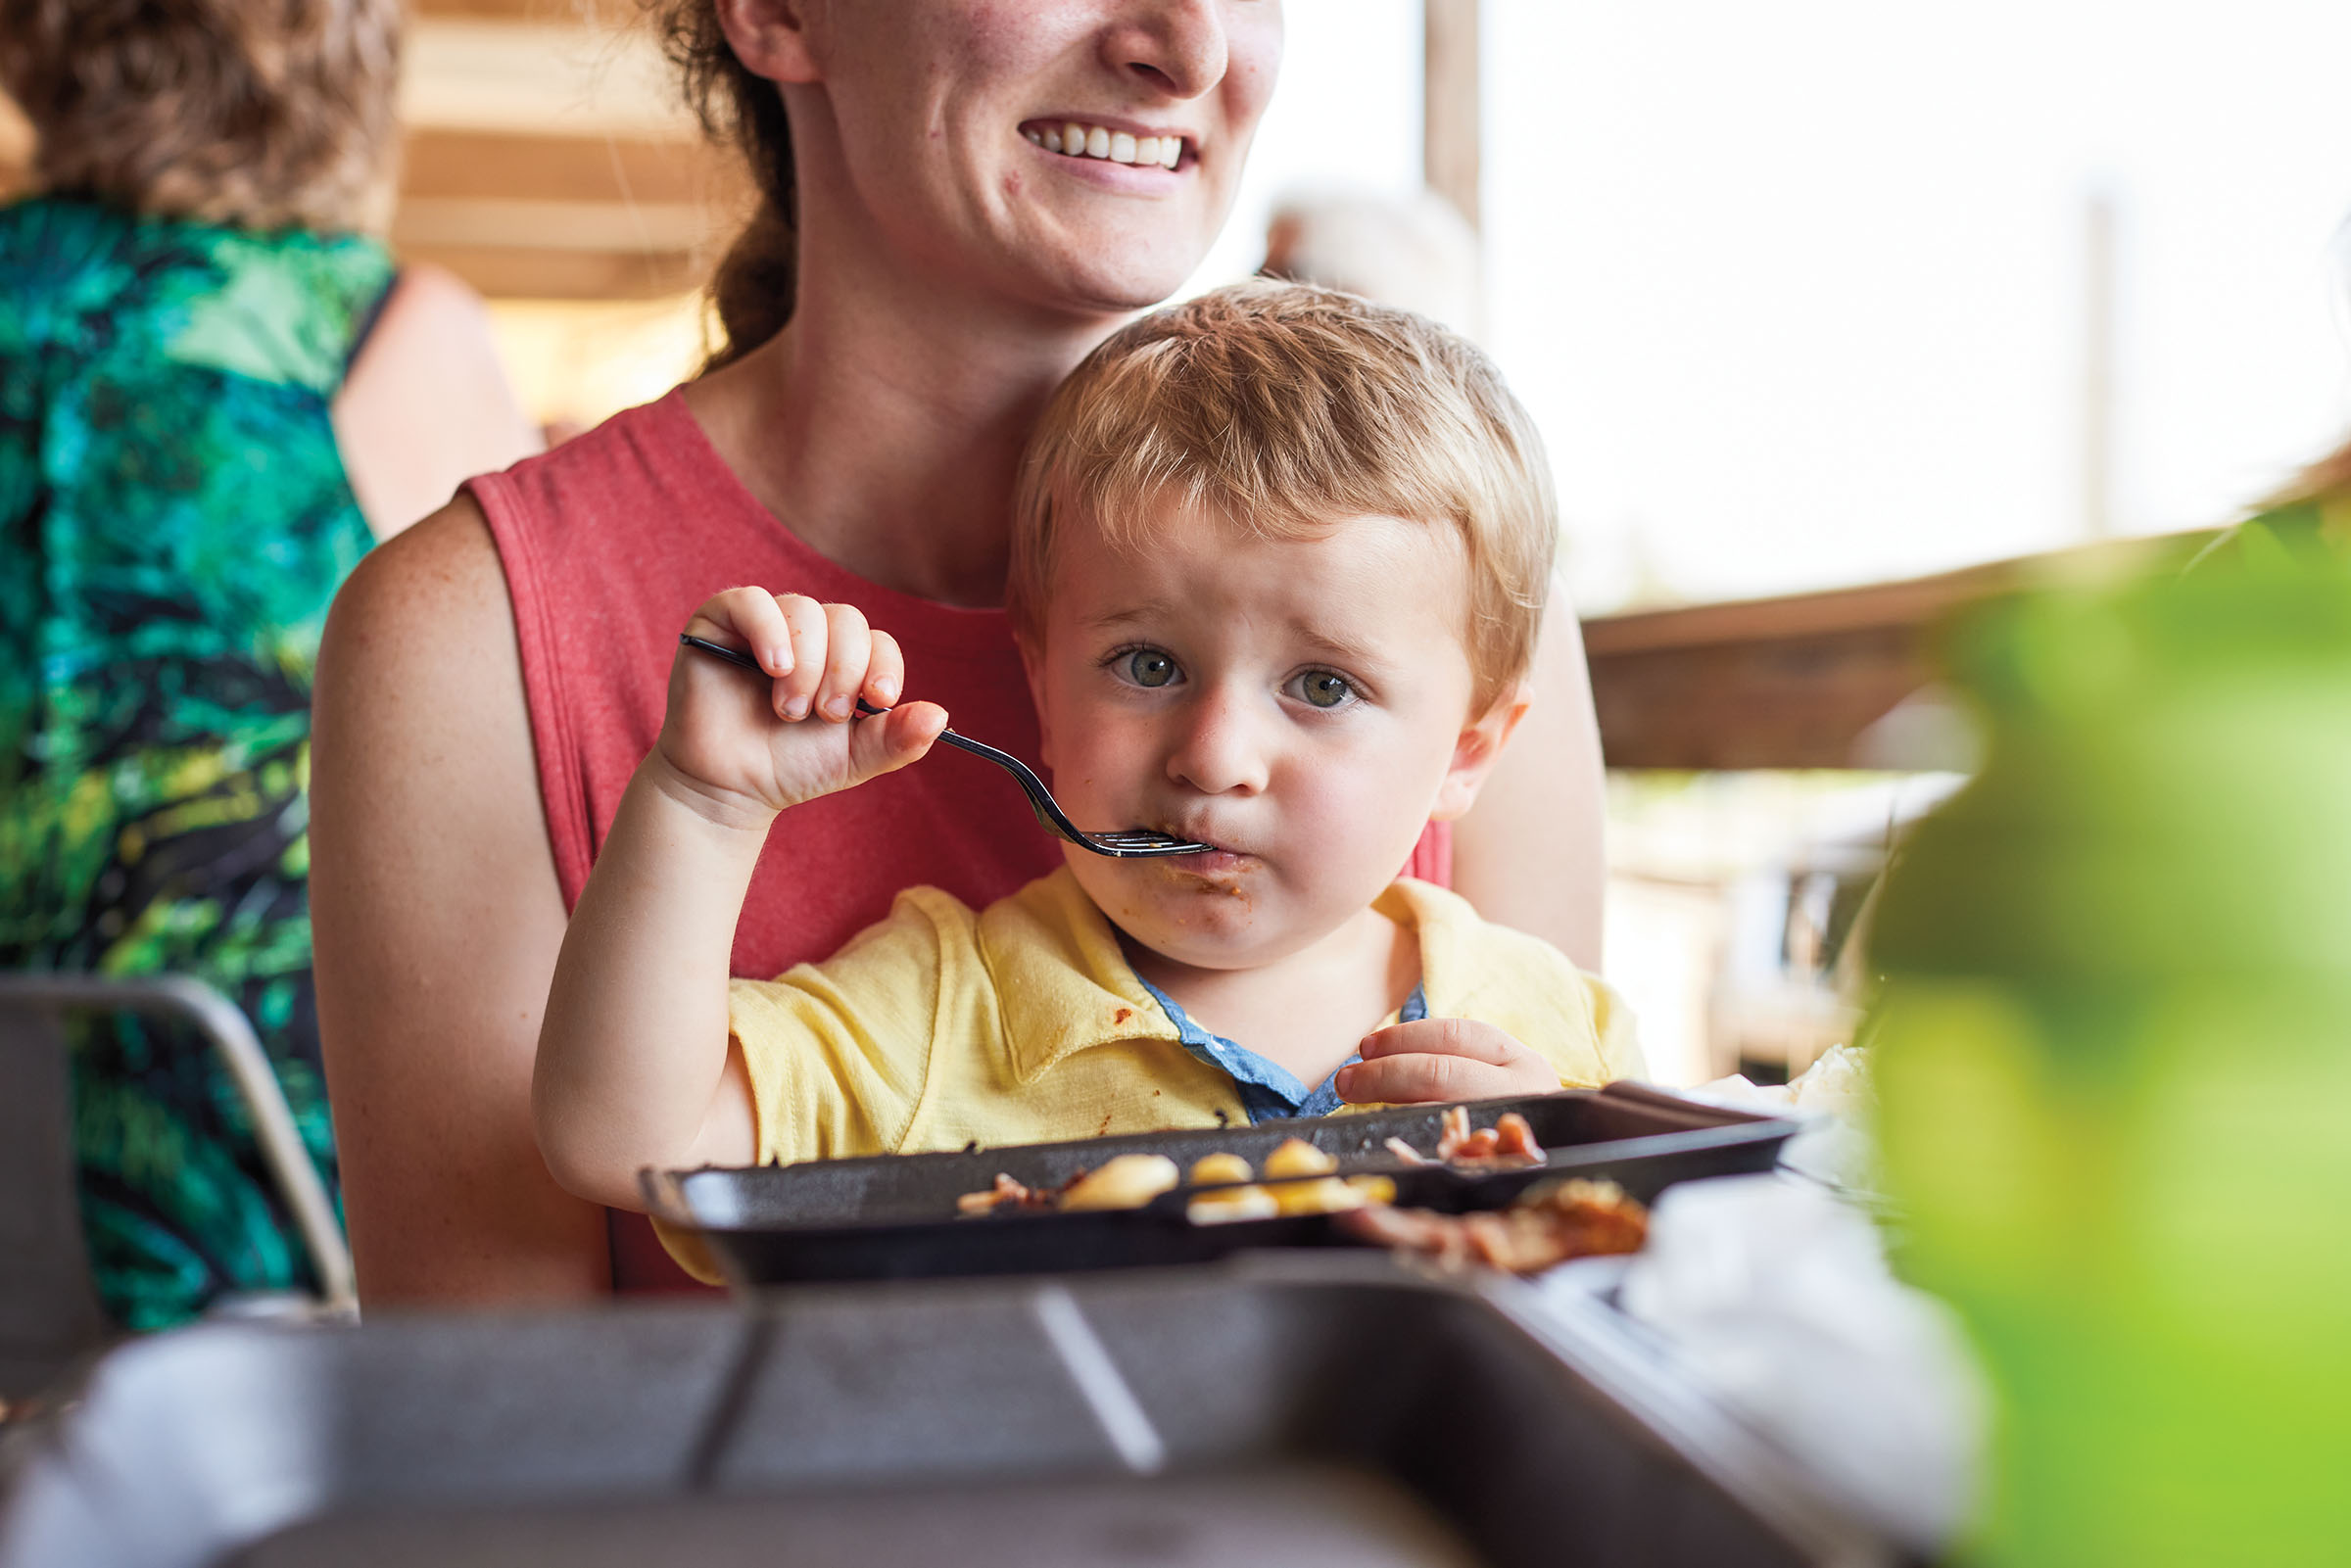 A child holds a spoon in his mouth in front of a dish of food